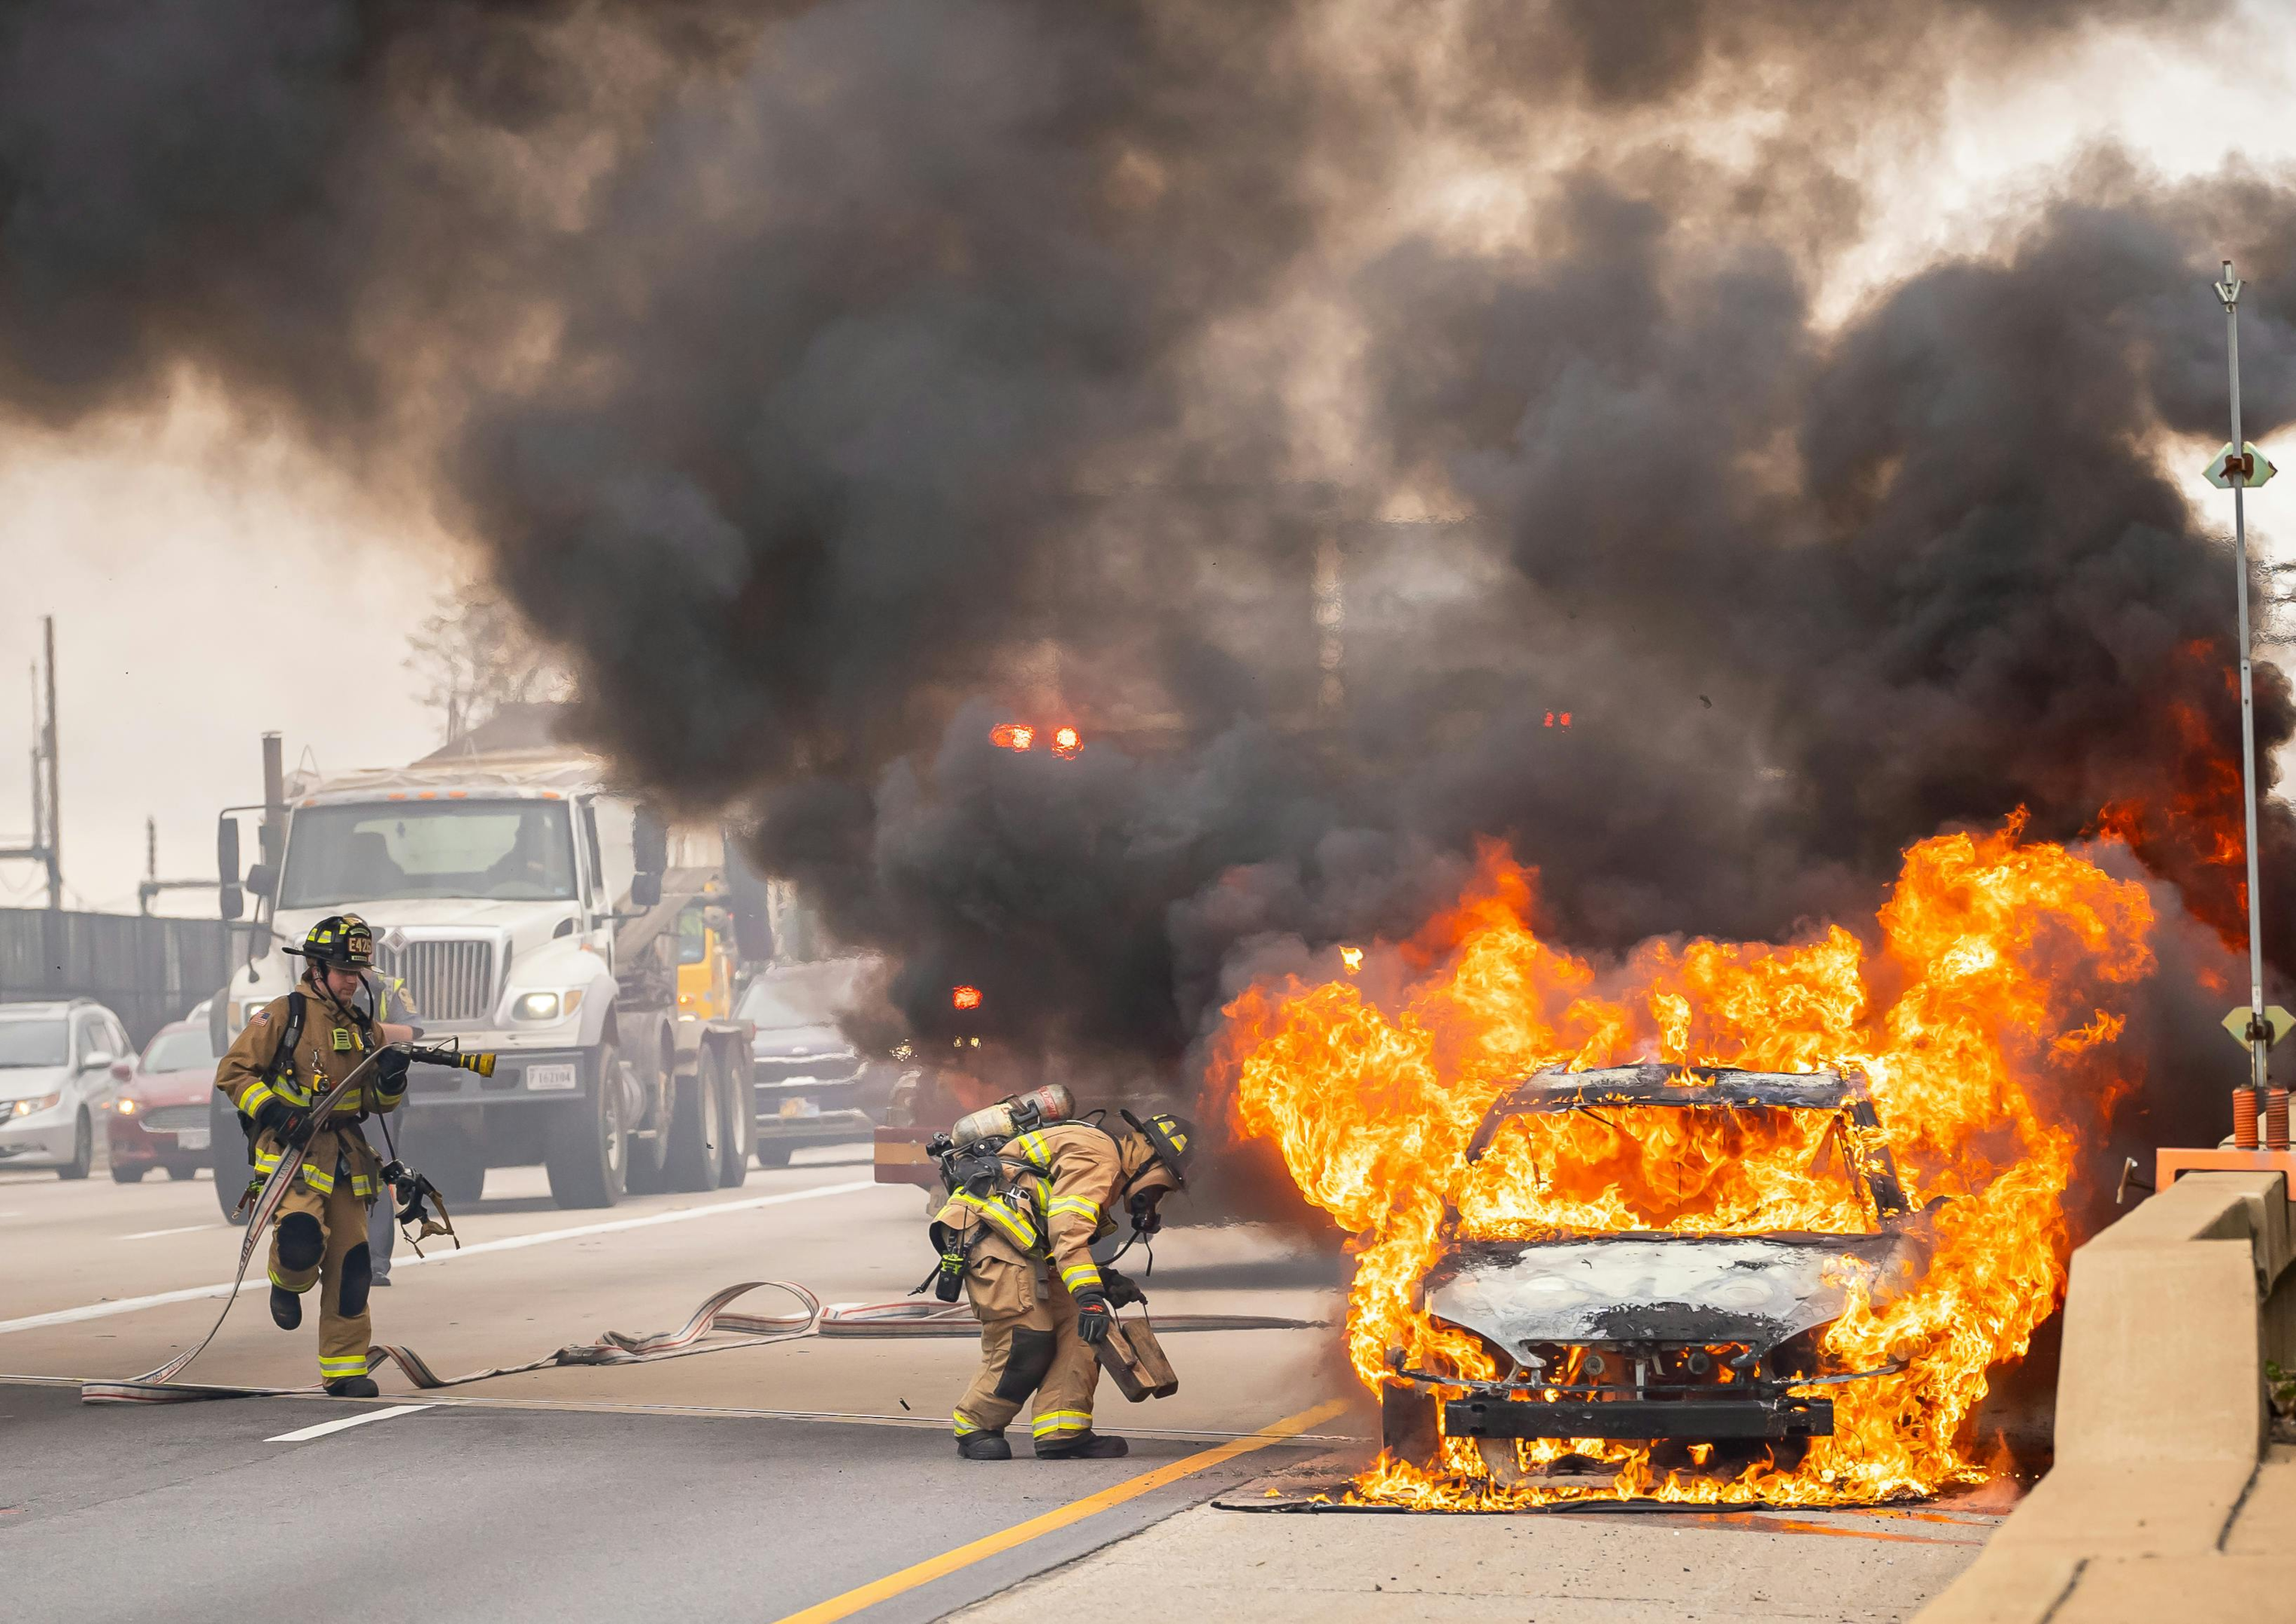 Two firefighters extinguishing a vehicle on fire on the highway.